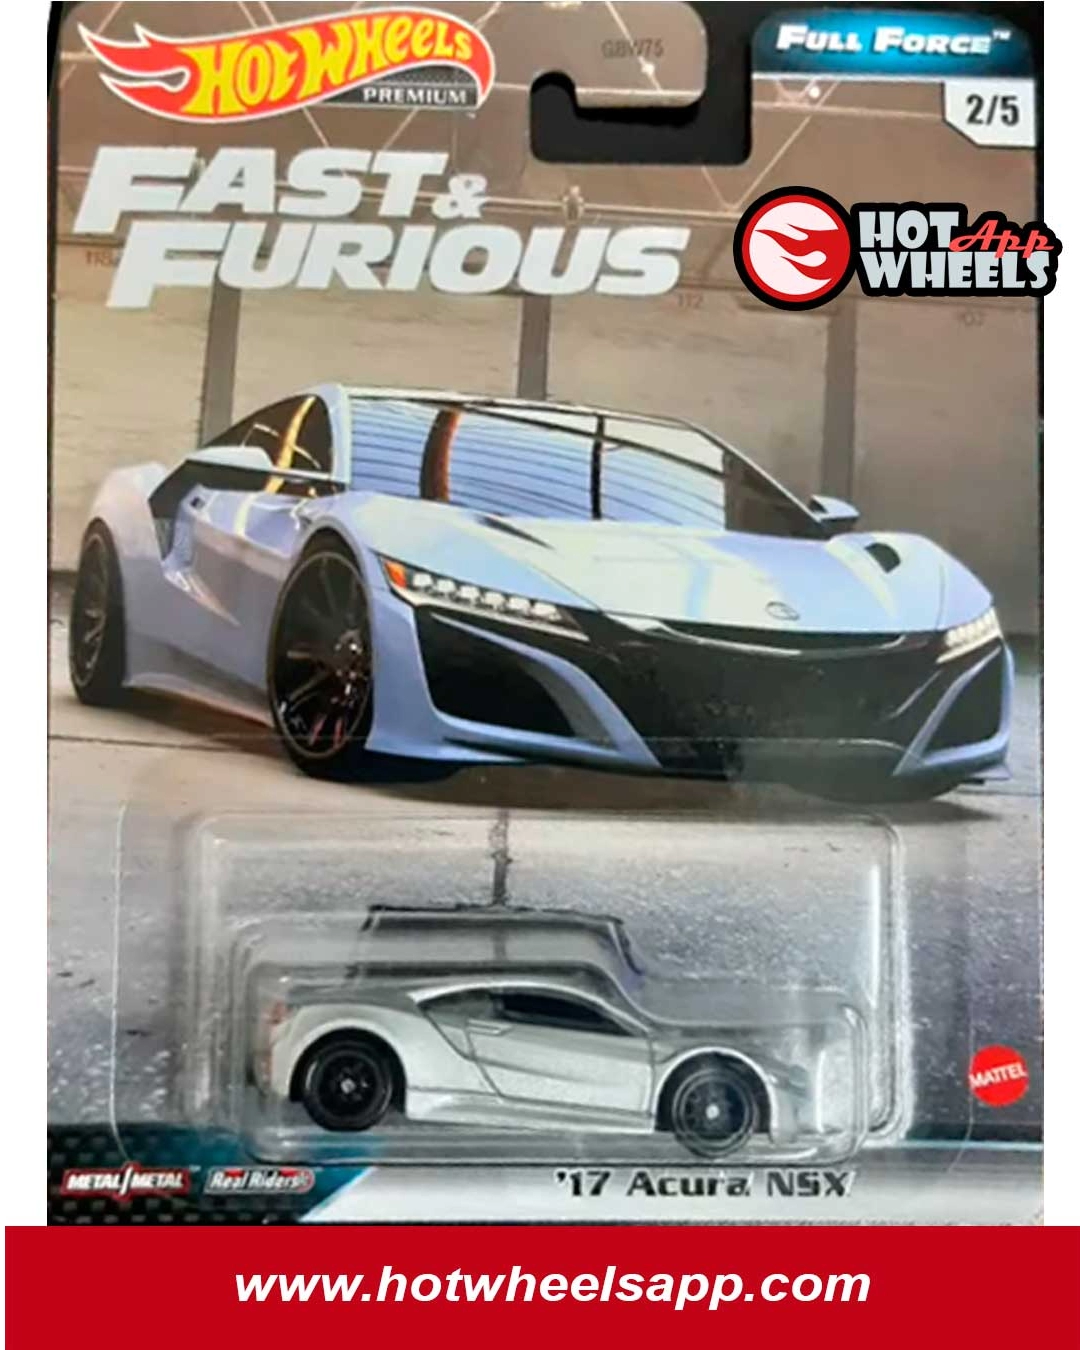 Details about   2020 Hot Wheels Premium Fast & Furious *Quick Shifters* 2017 Acura NSX.